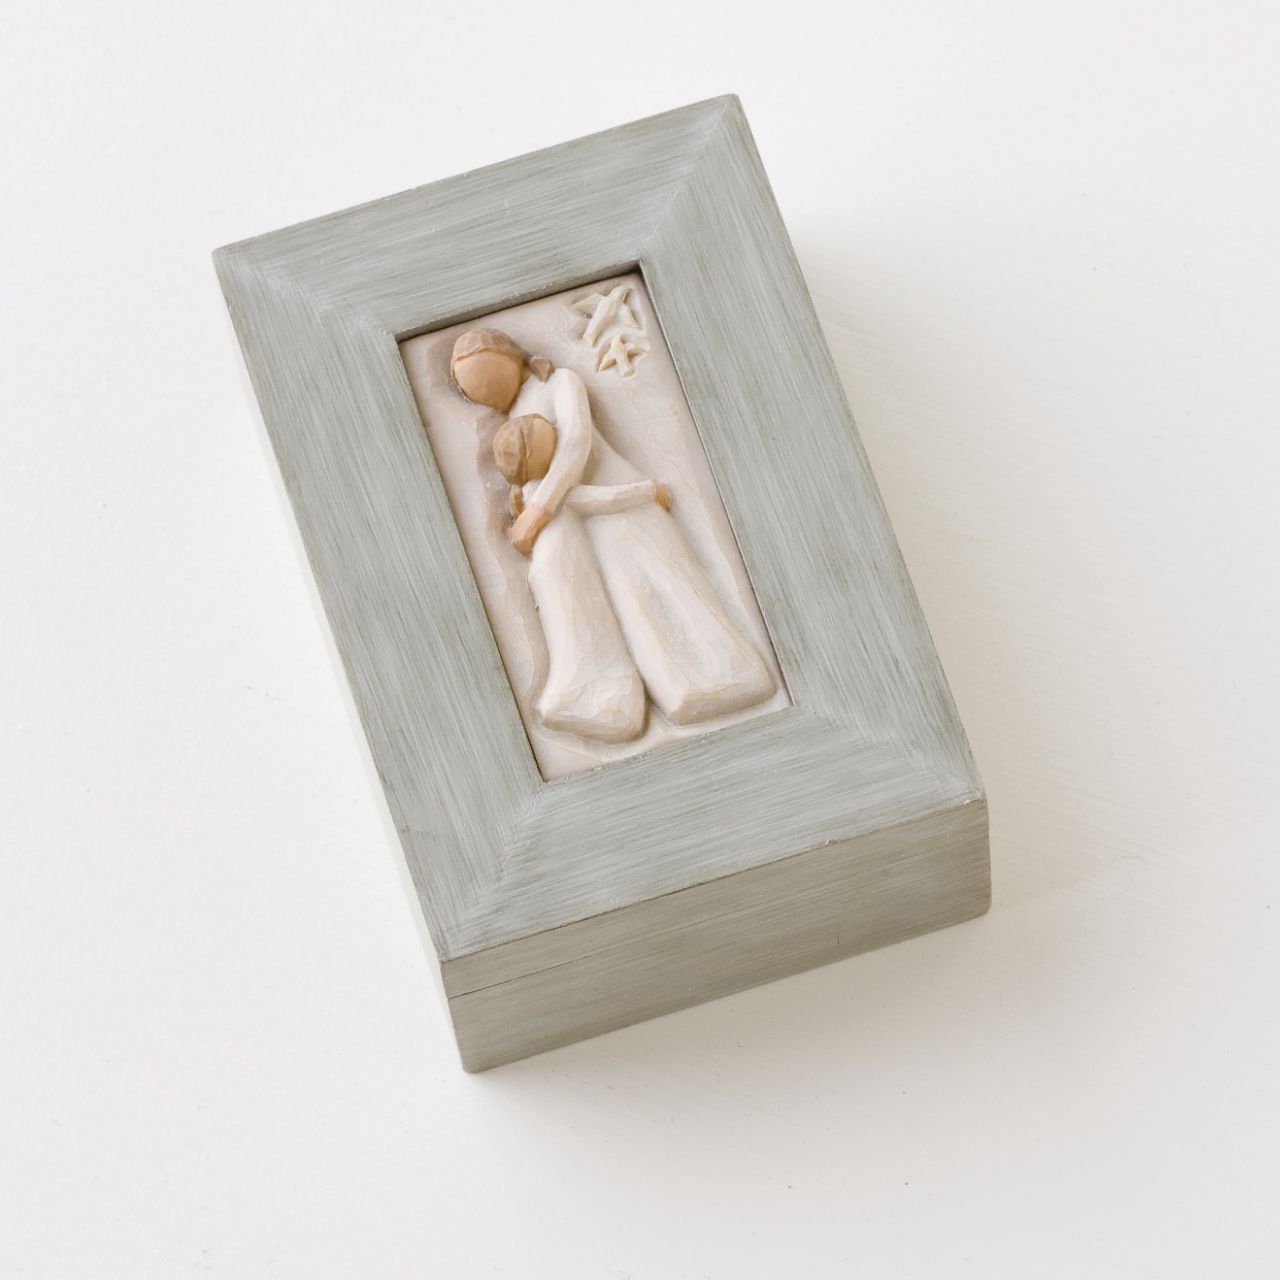 Mother and Daughter Memory Box by Willow Tree  Willow Tree is an intimate line of figurative sculpture that speaks in quiet ways to heal, comfort, protect and inspire. Artist Susan Lordi hand carves each original Willow Tree sculpture. This piece is cast from her original carving, and then painted by hand. The box features a woman holding a child. Finely crafted wood box with hinged lid is nice for notes, keys, watches, change and jewellery.